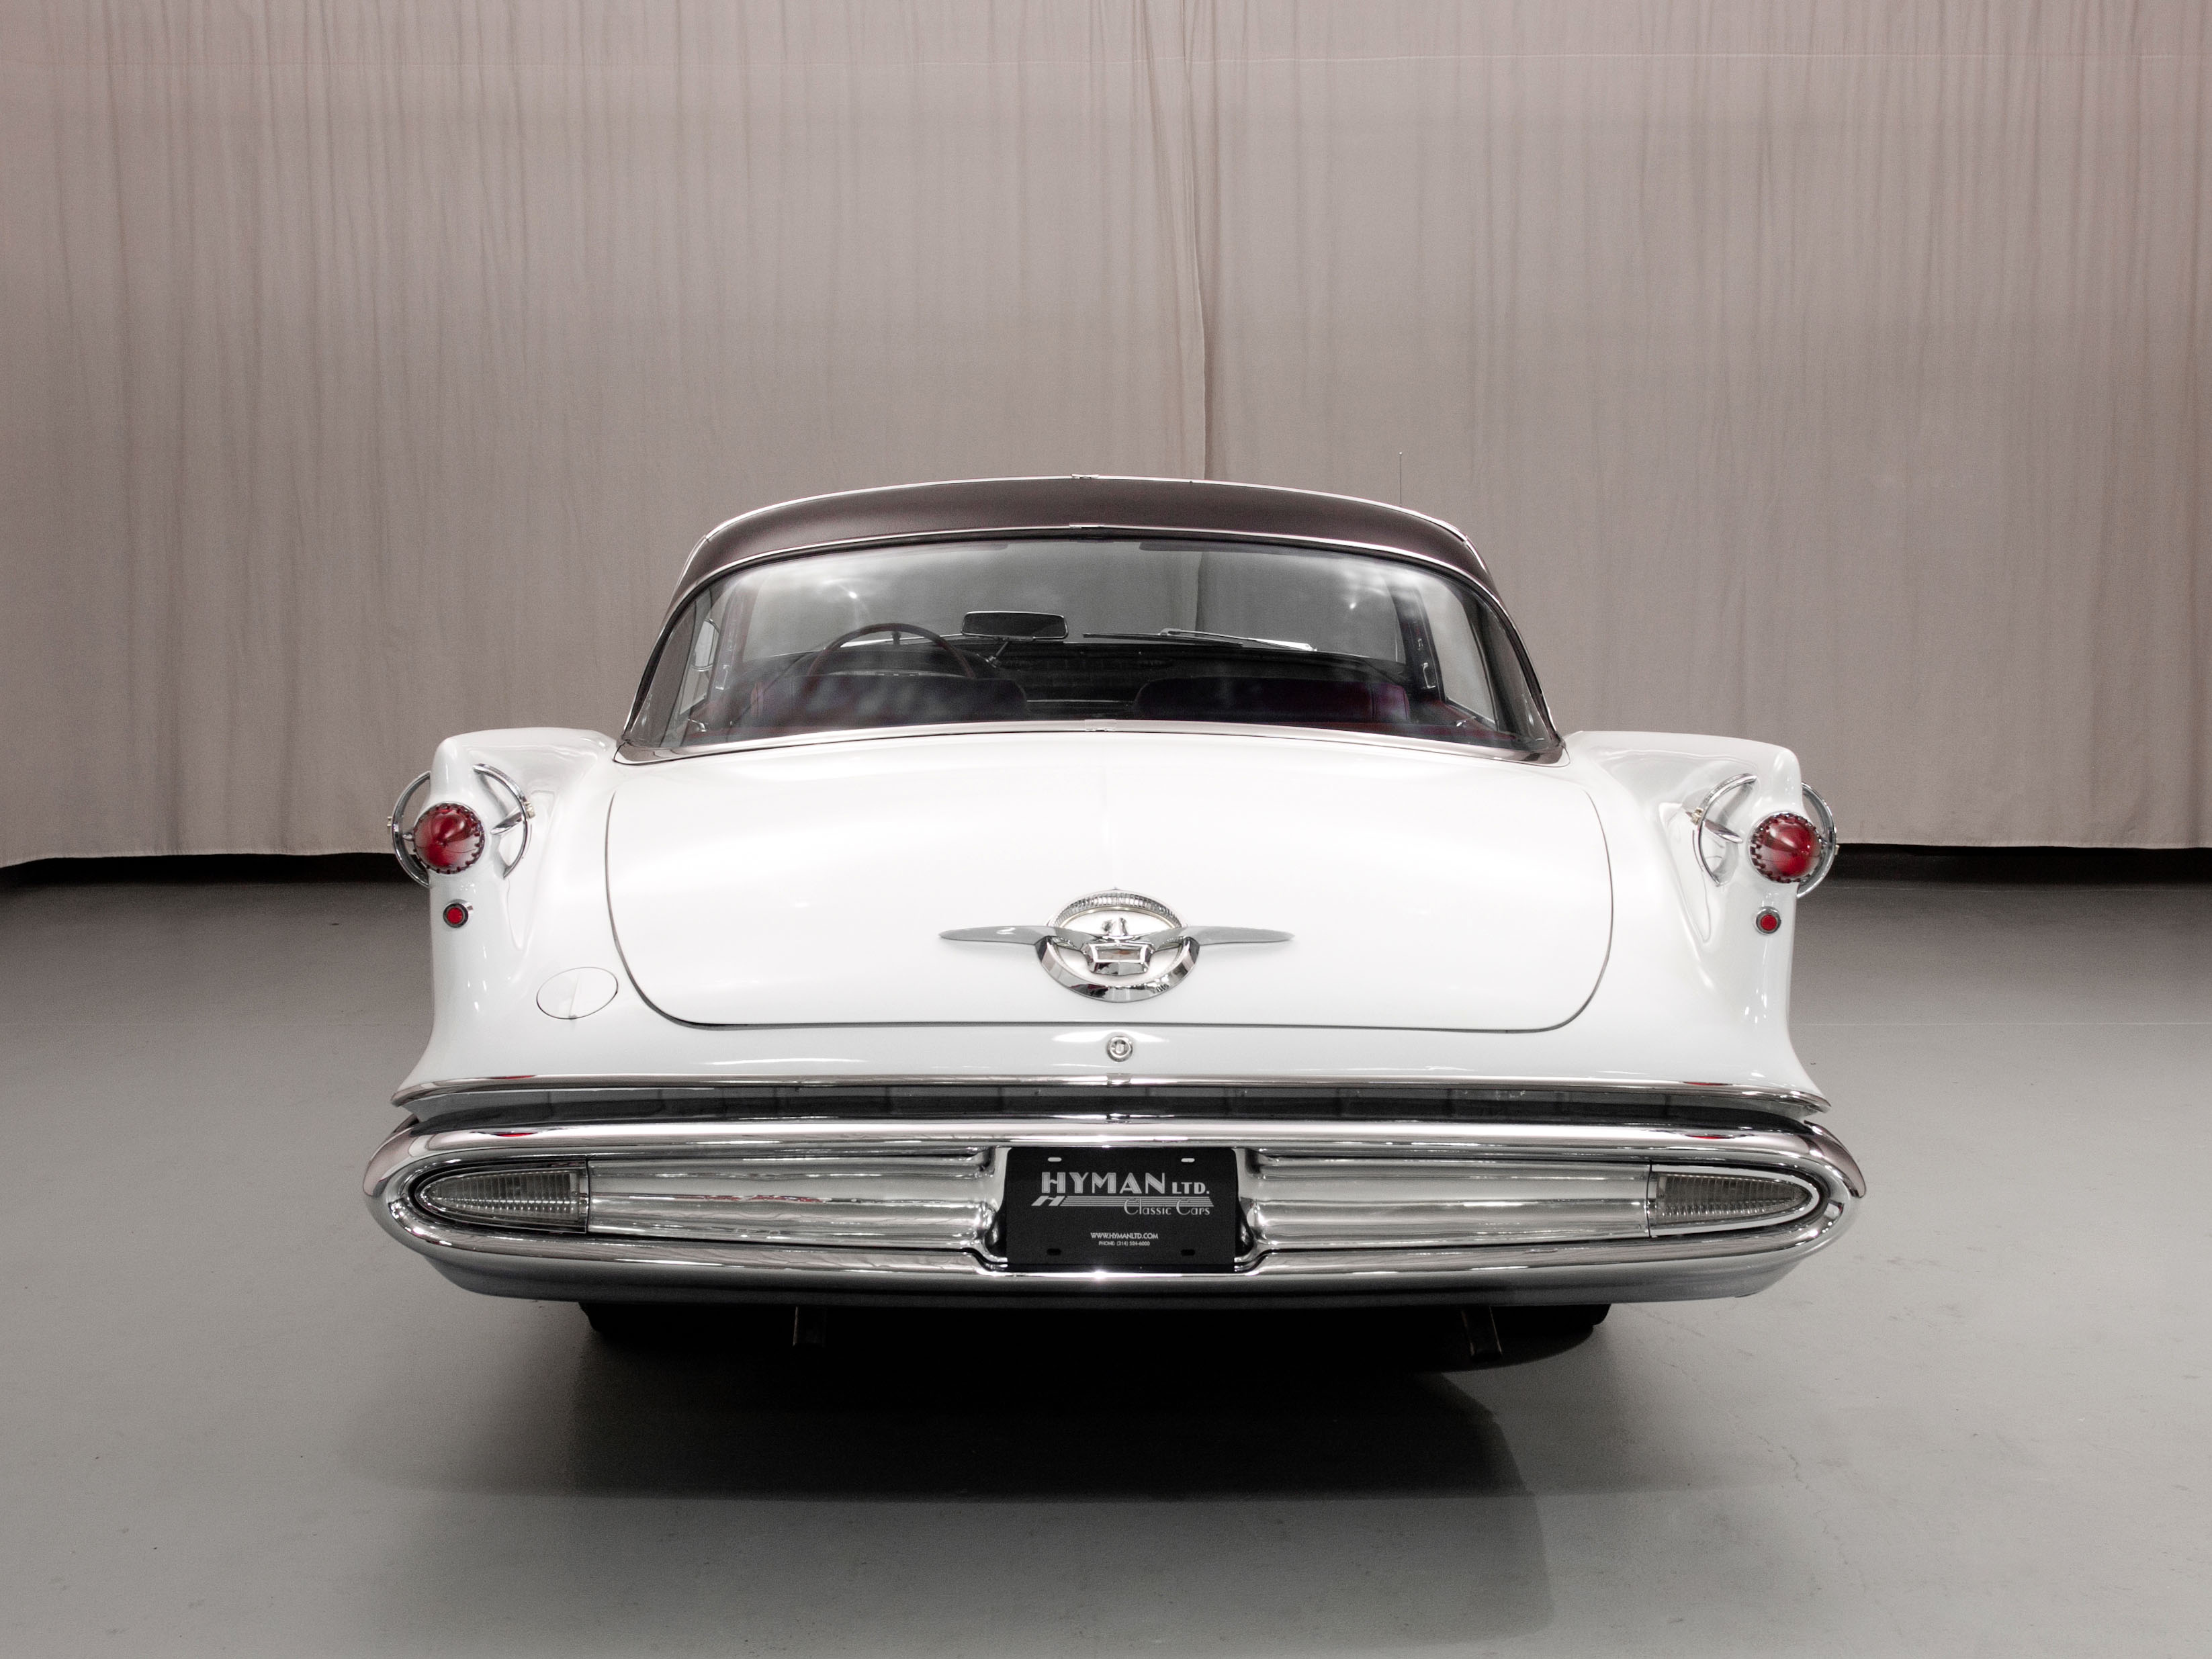 1957 imperial imperial lebaron